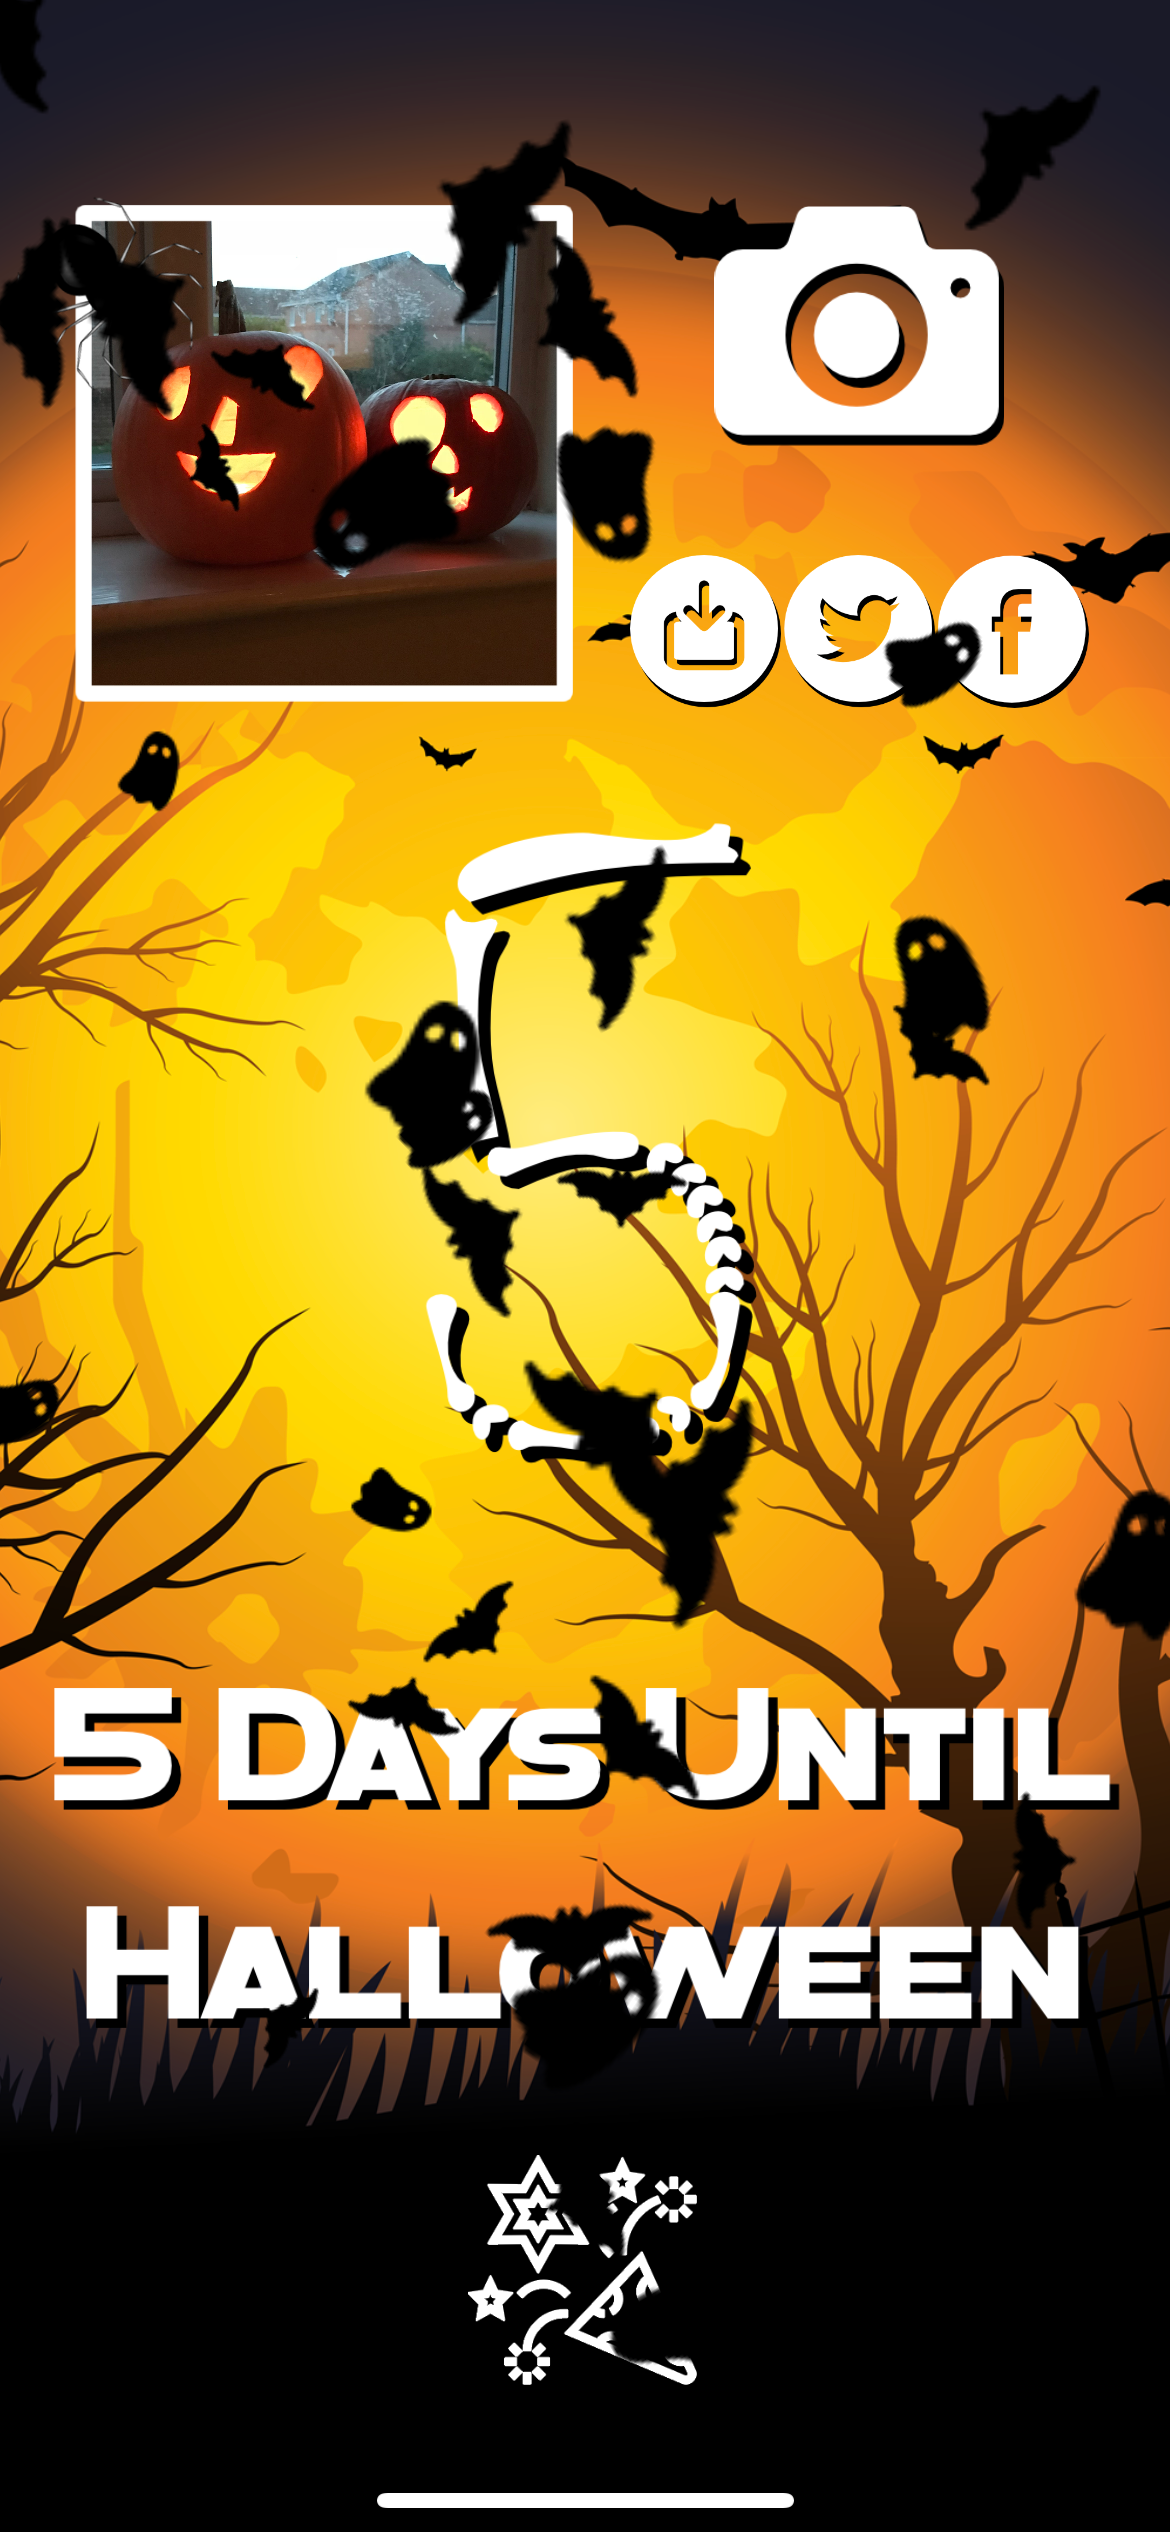 Countdown to Halloween screenshot, showing the cannon confetti on screen and a personalized image